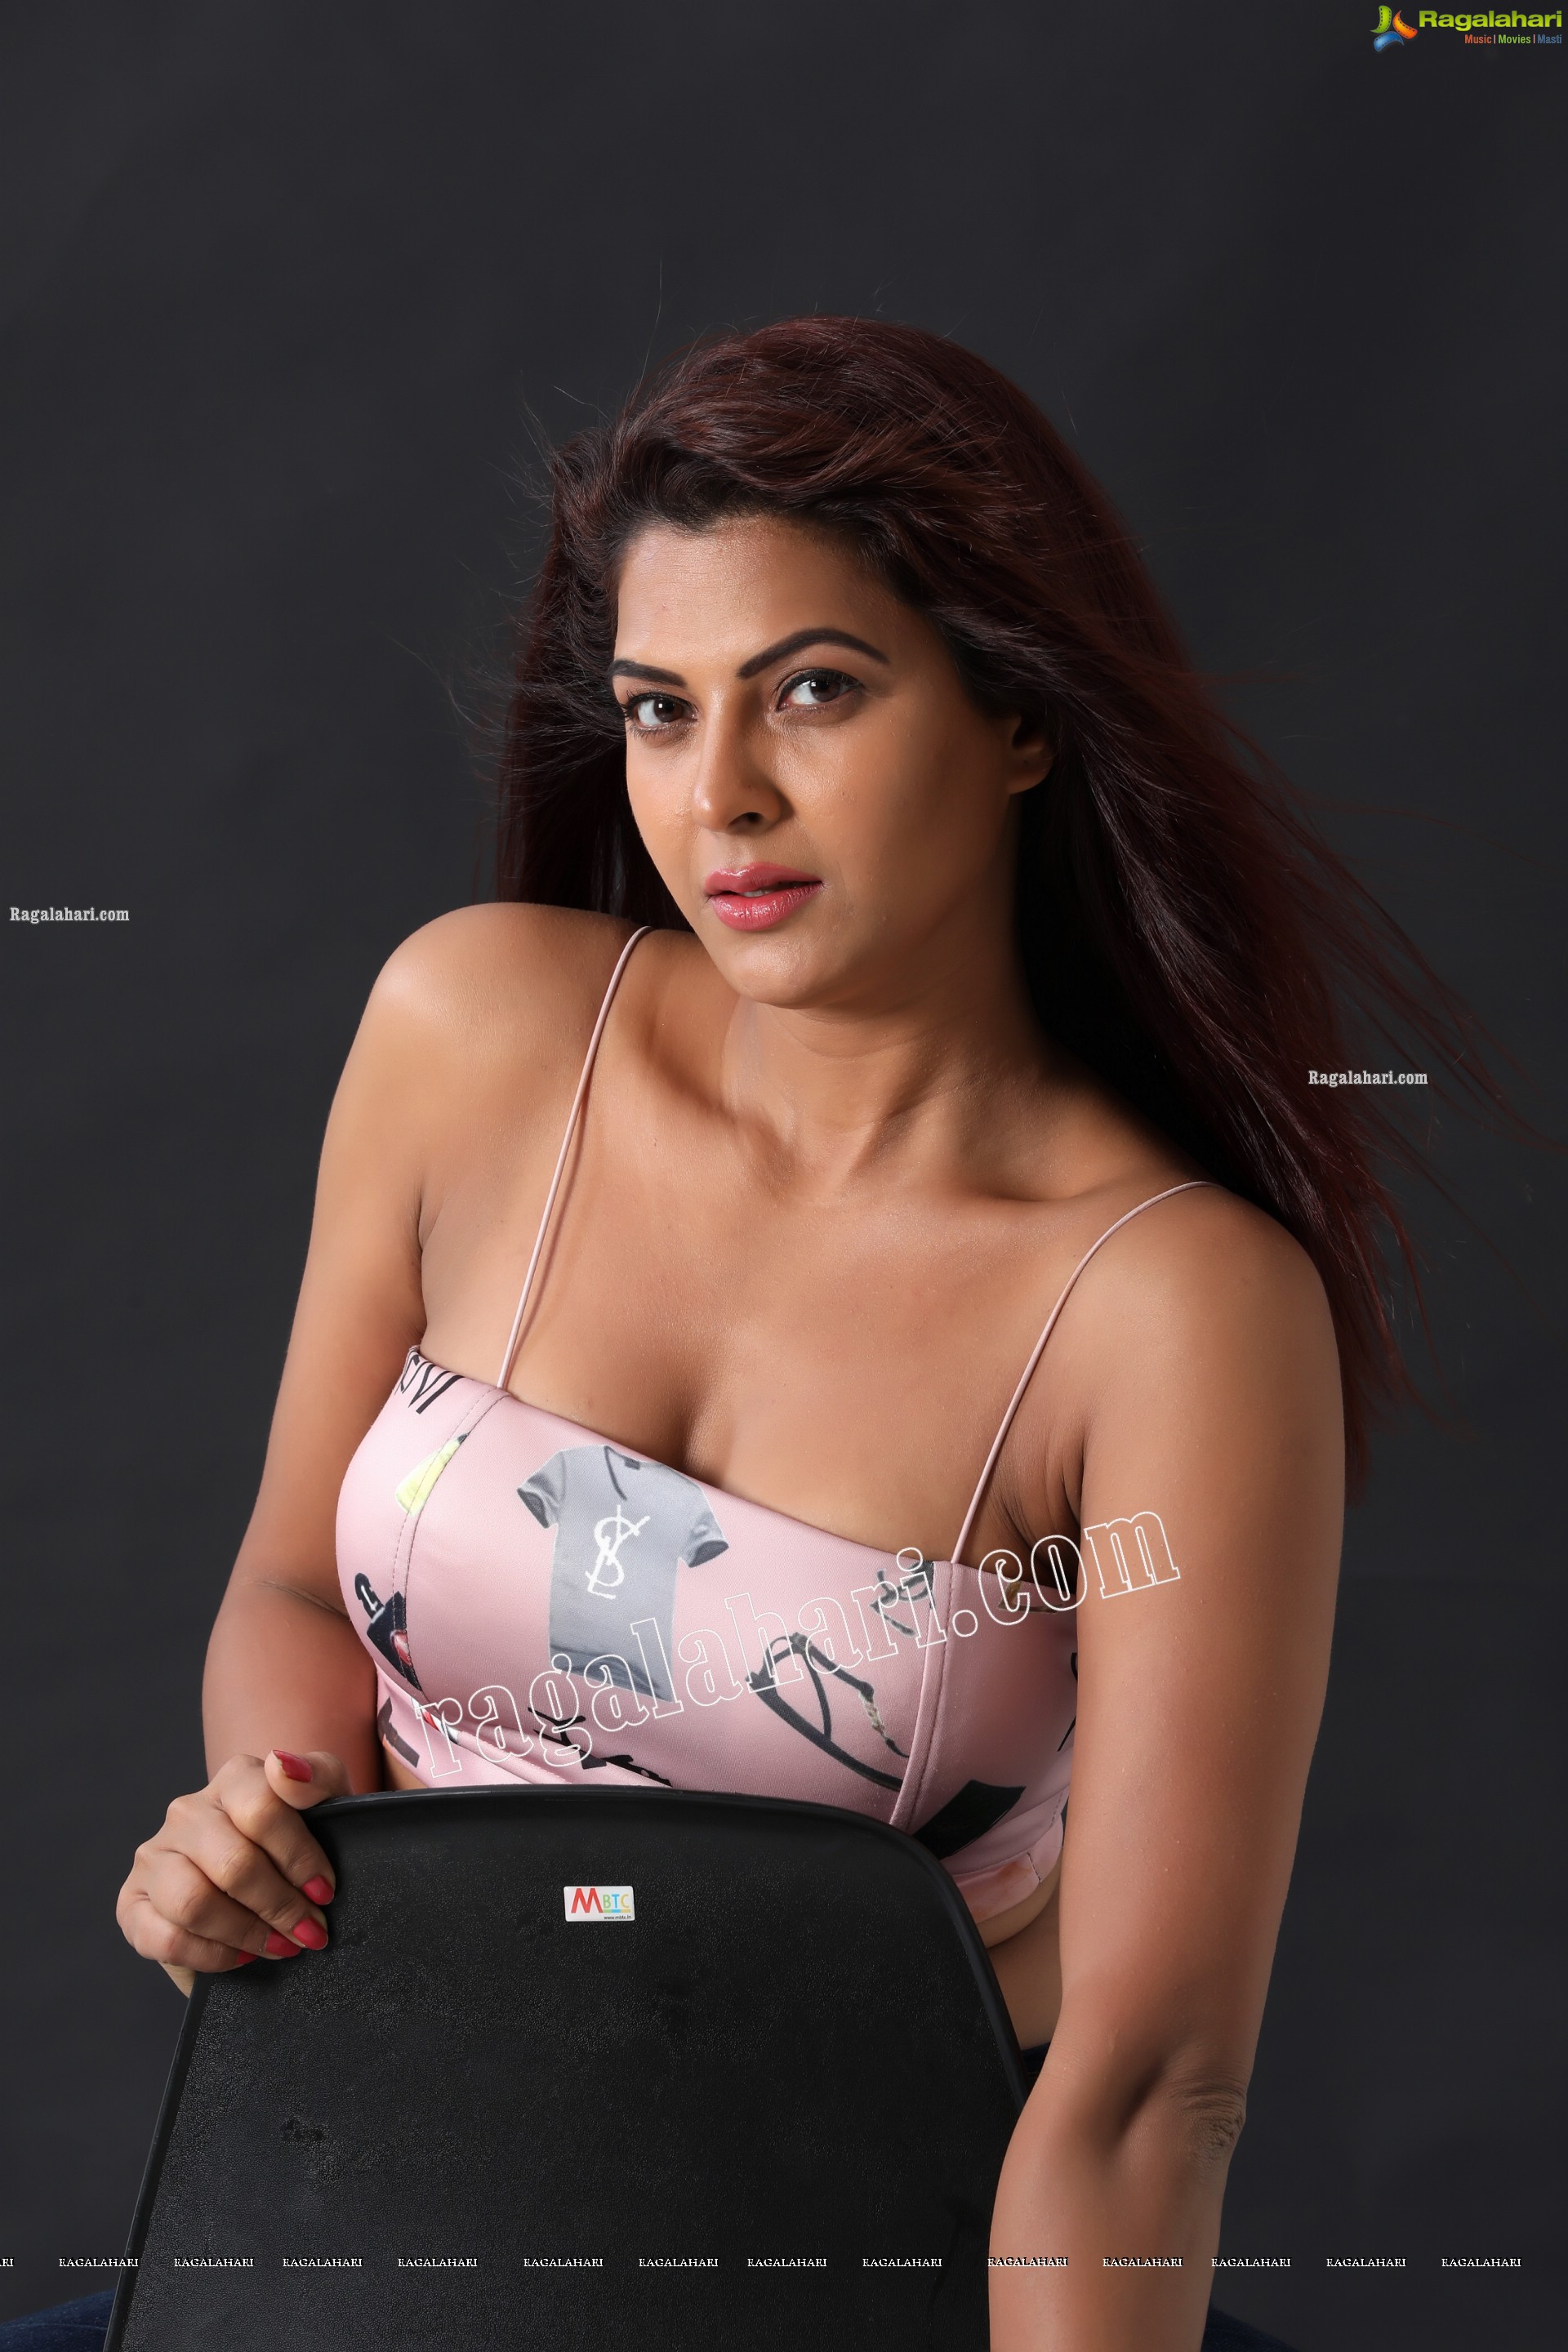 Kashish Singh In Spaghetti Strap Crop Top and Jeans, Exclusive Photo Shoot